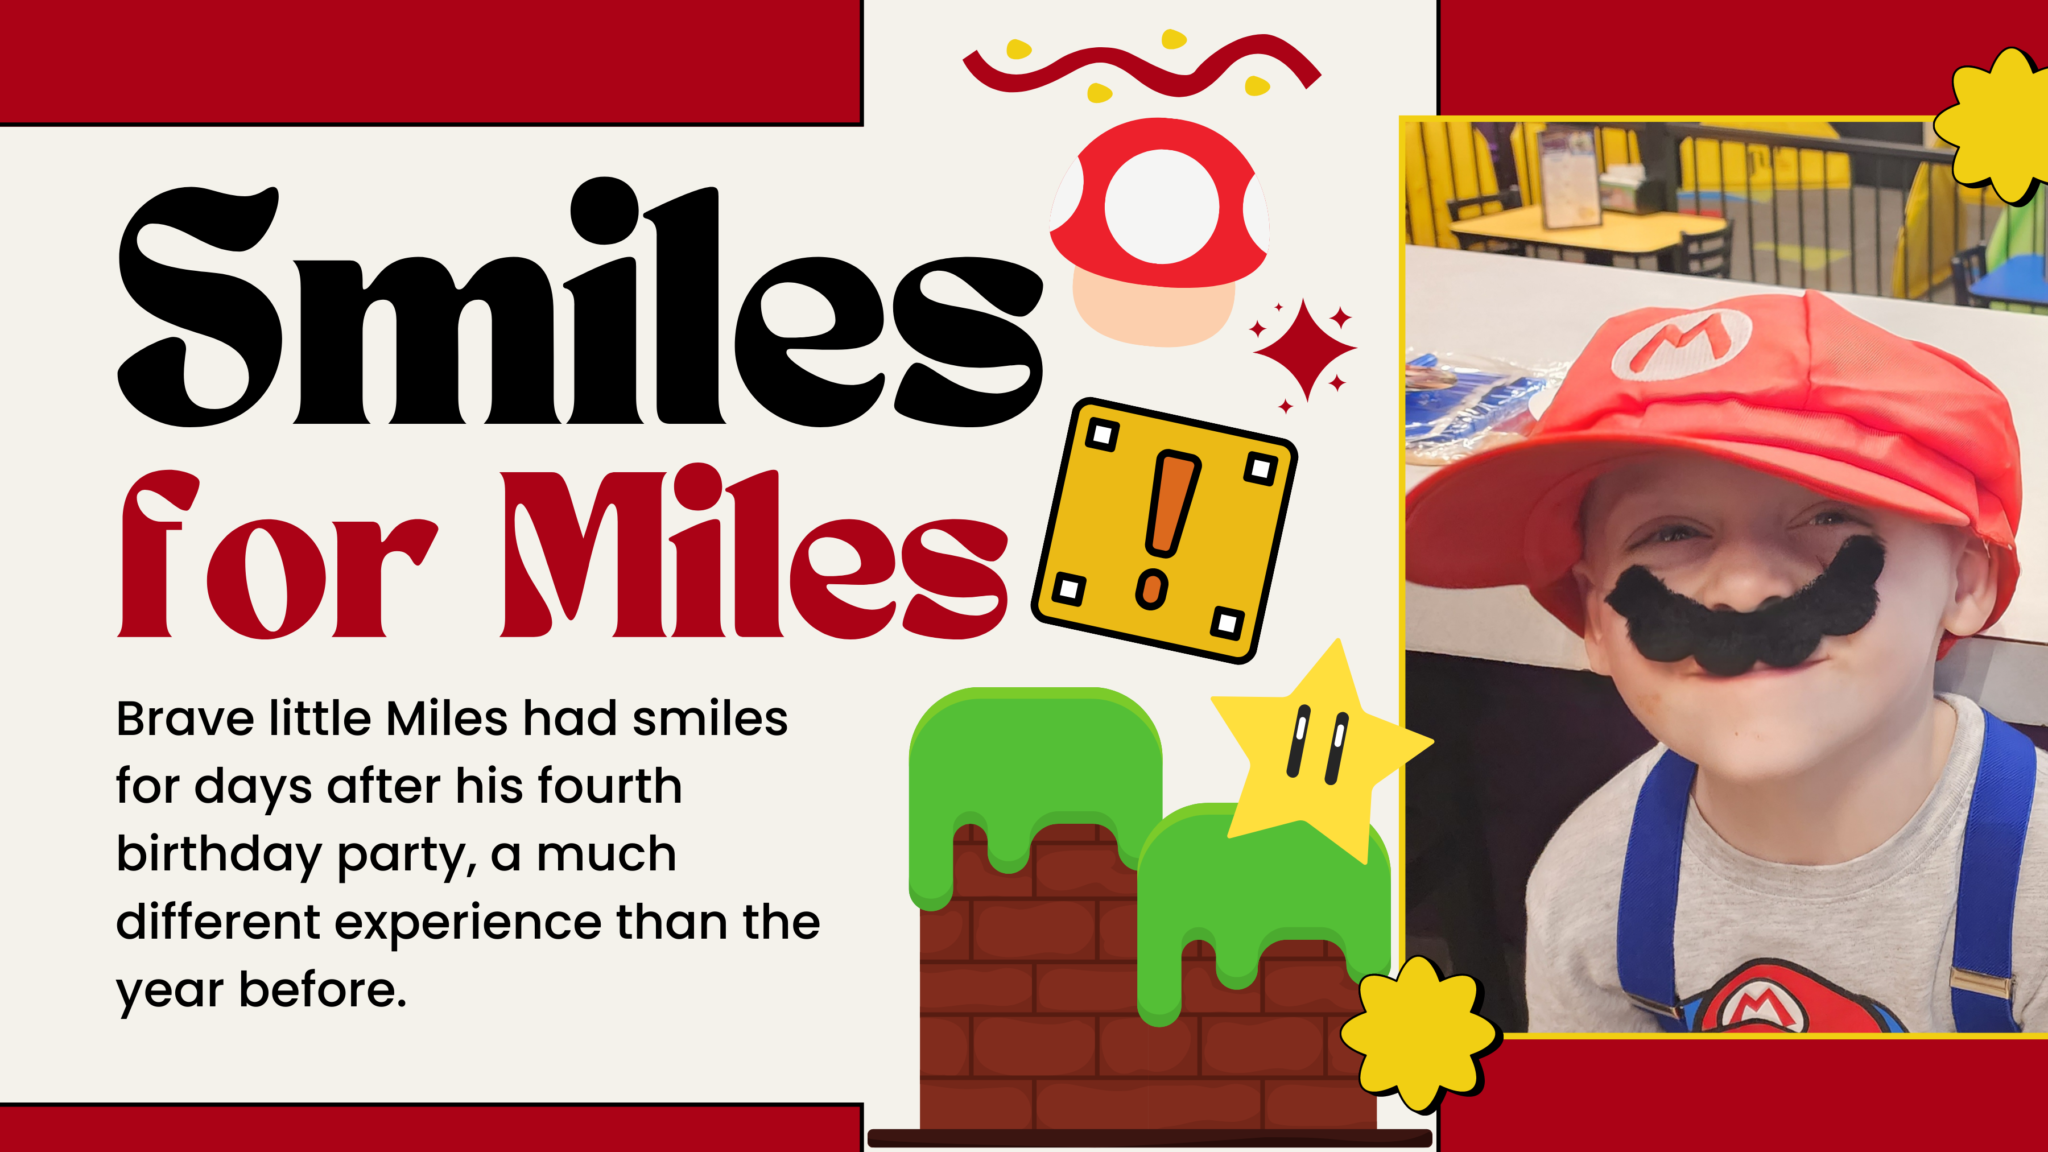 Smiles for Miles